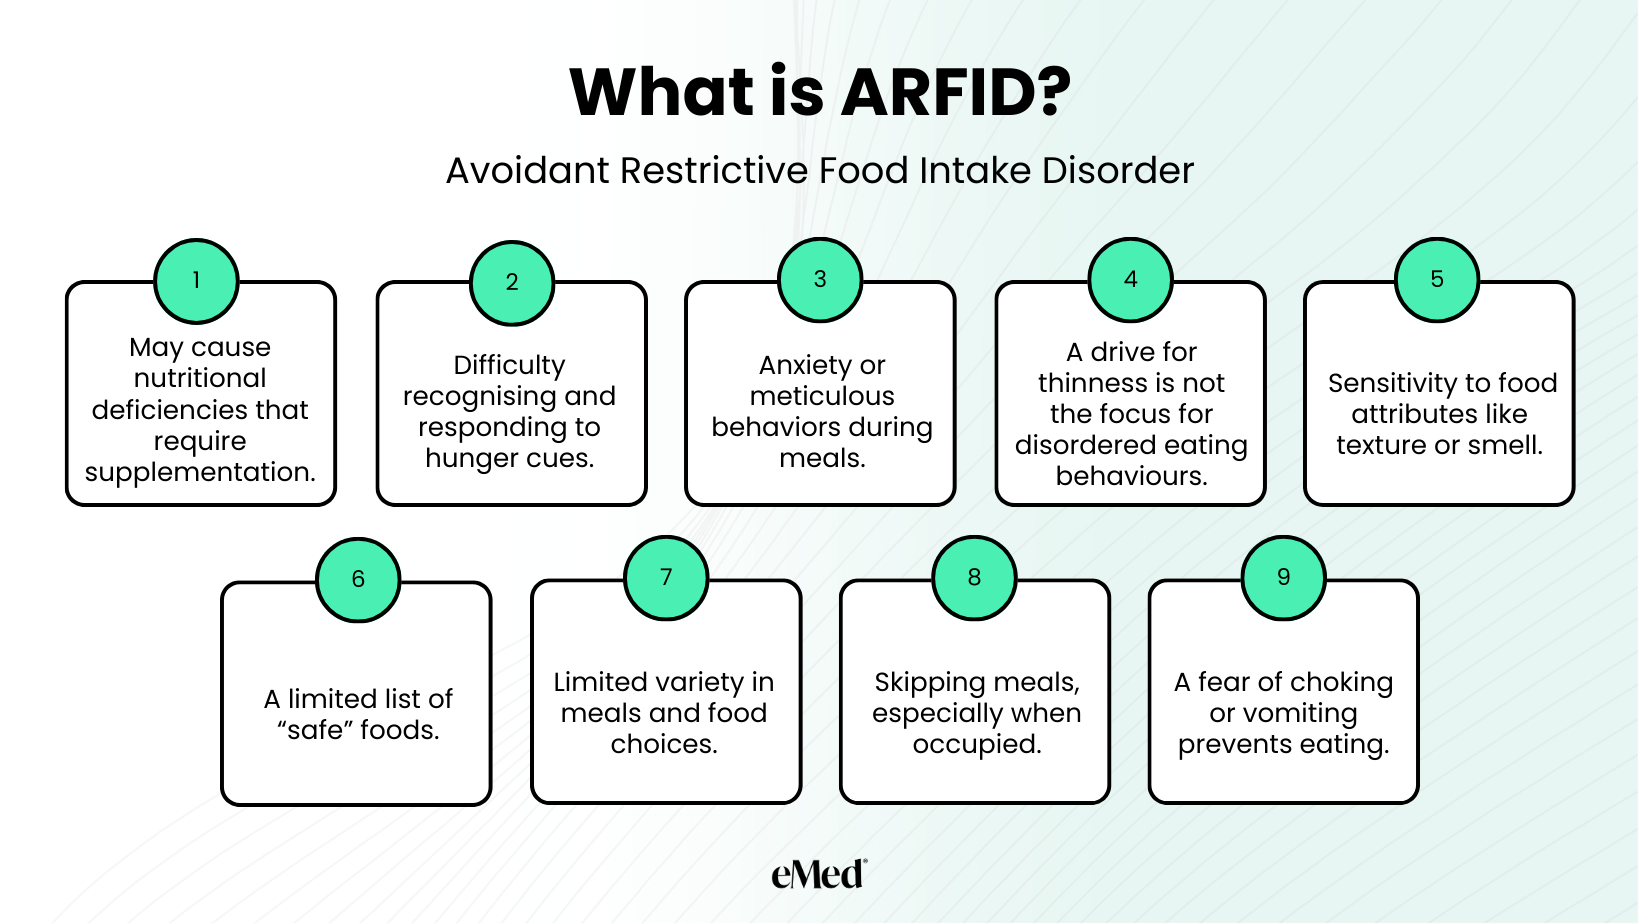 ARFID - What is Avoidant/Restrictive Food Intake Disorder